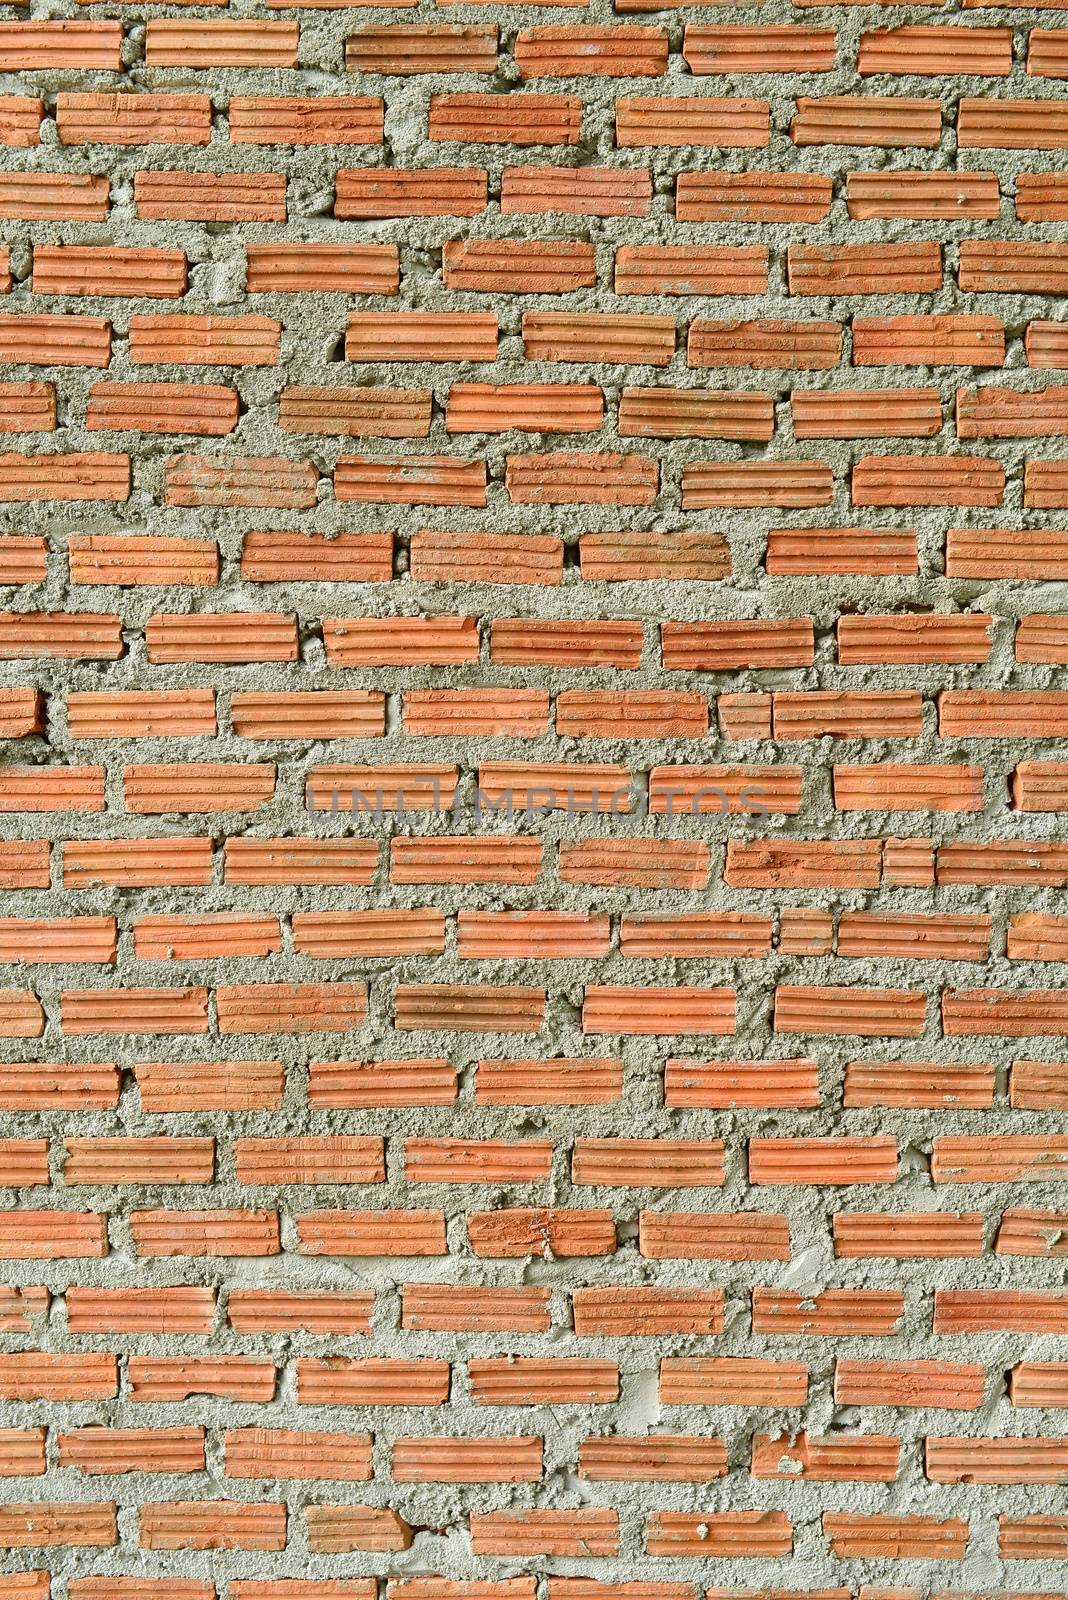 Brick Wall by antpkr